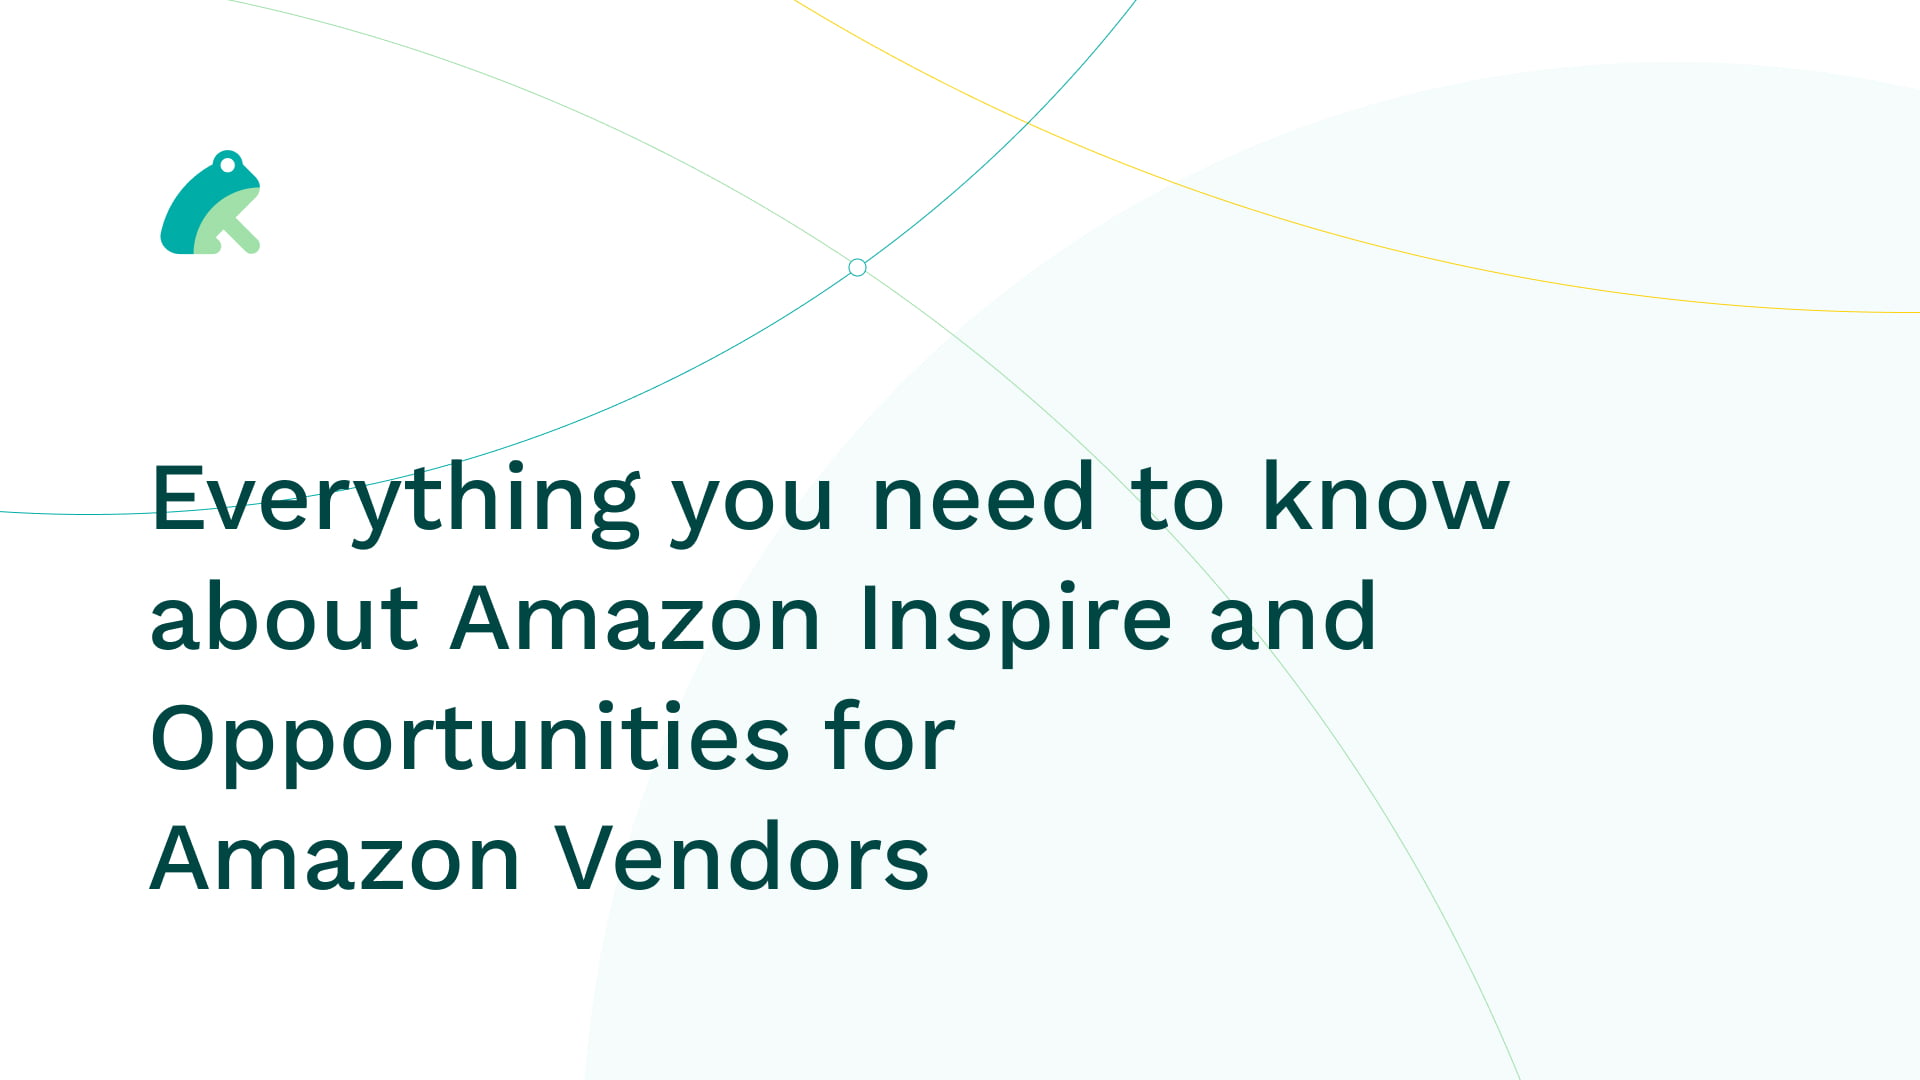 Everything you need to know about Amazon Inspire and Opportunities for Amazon Vendors